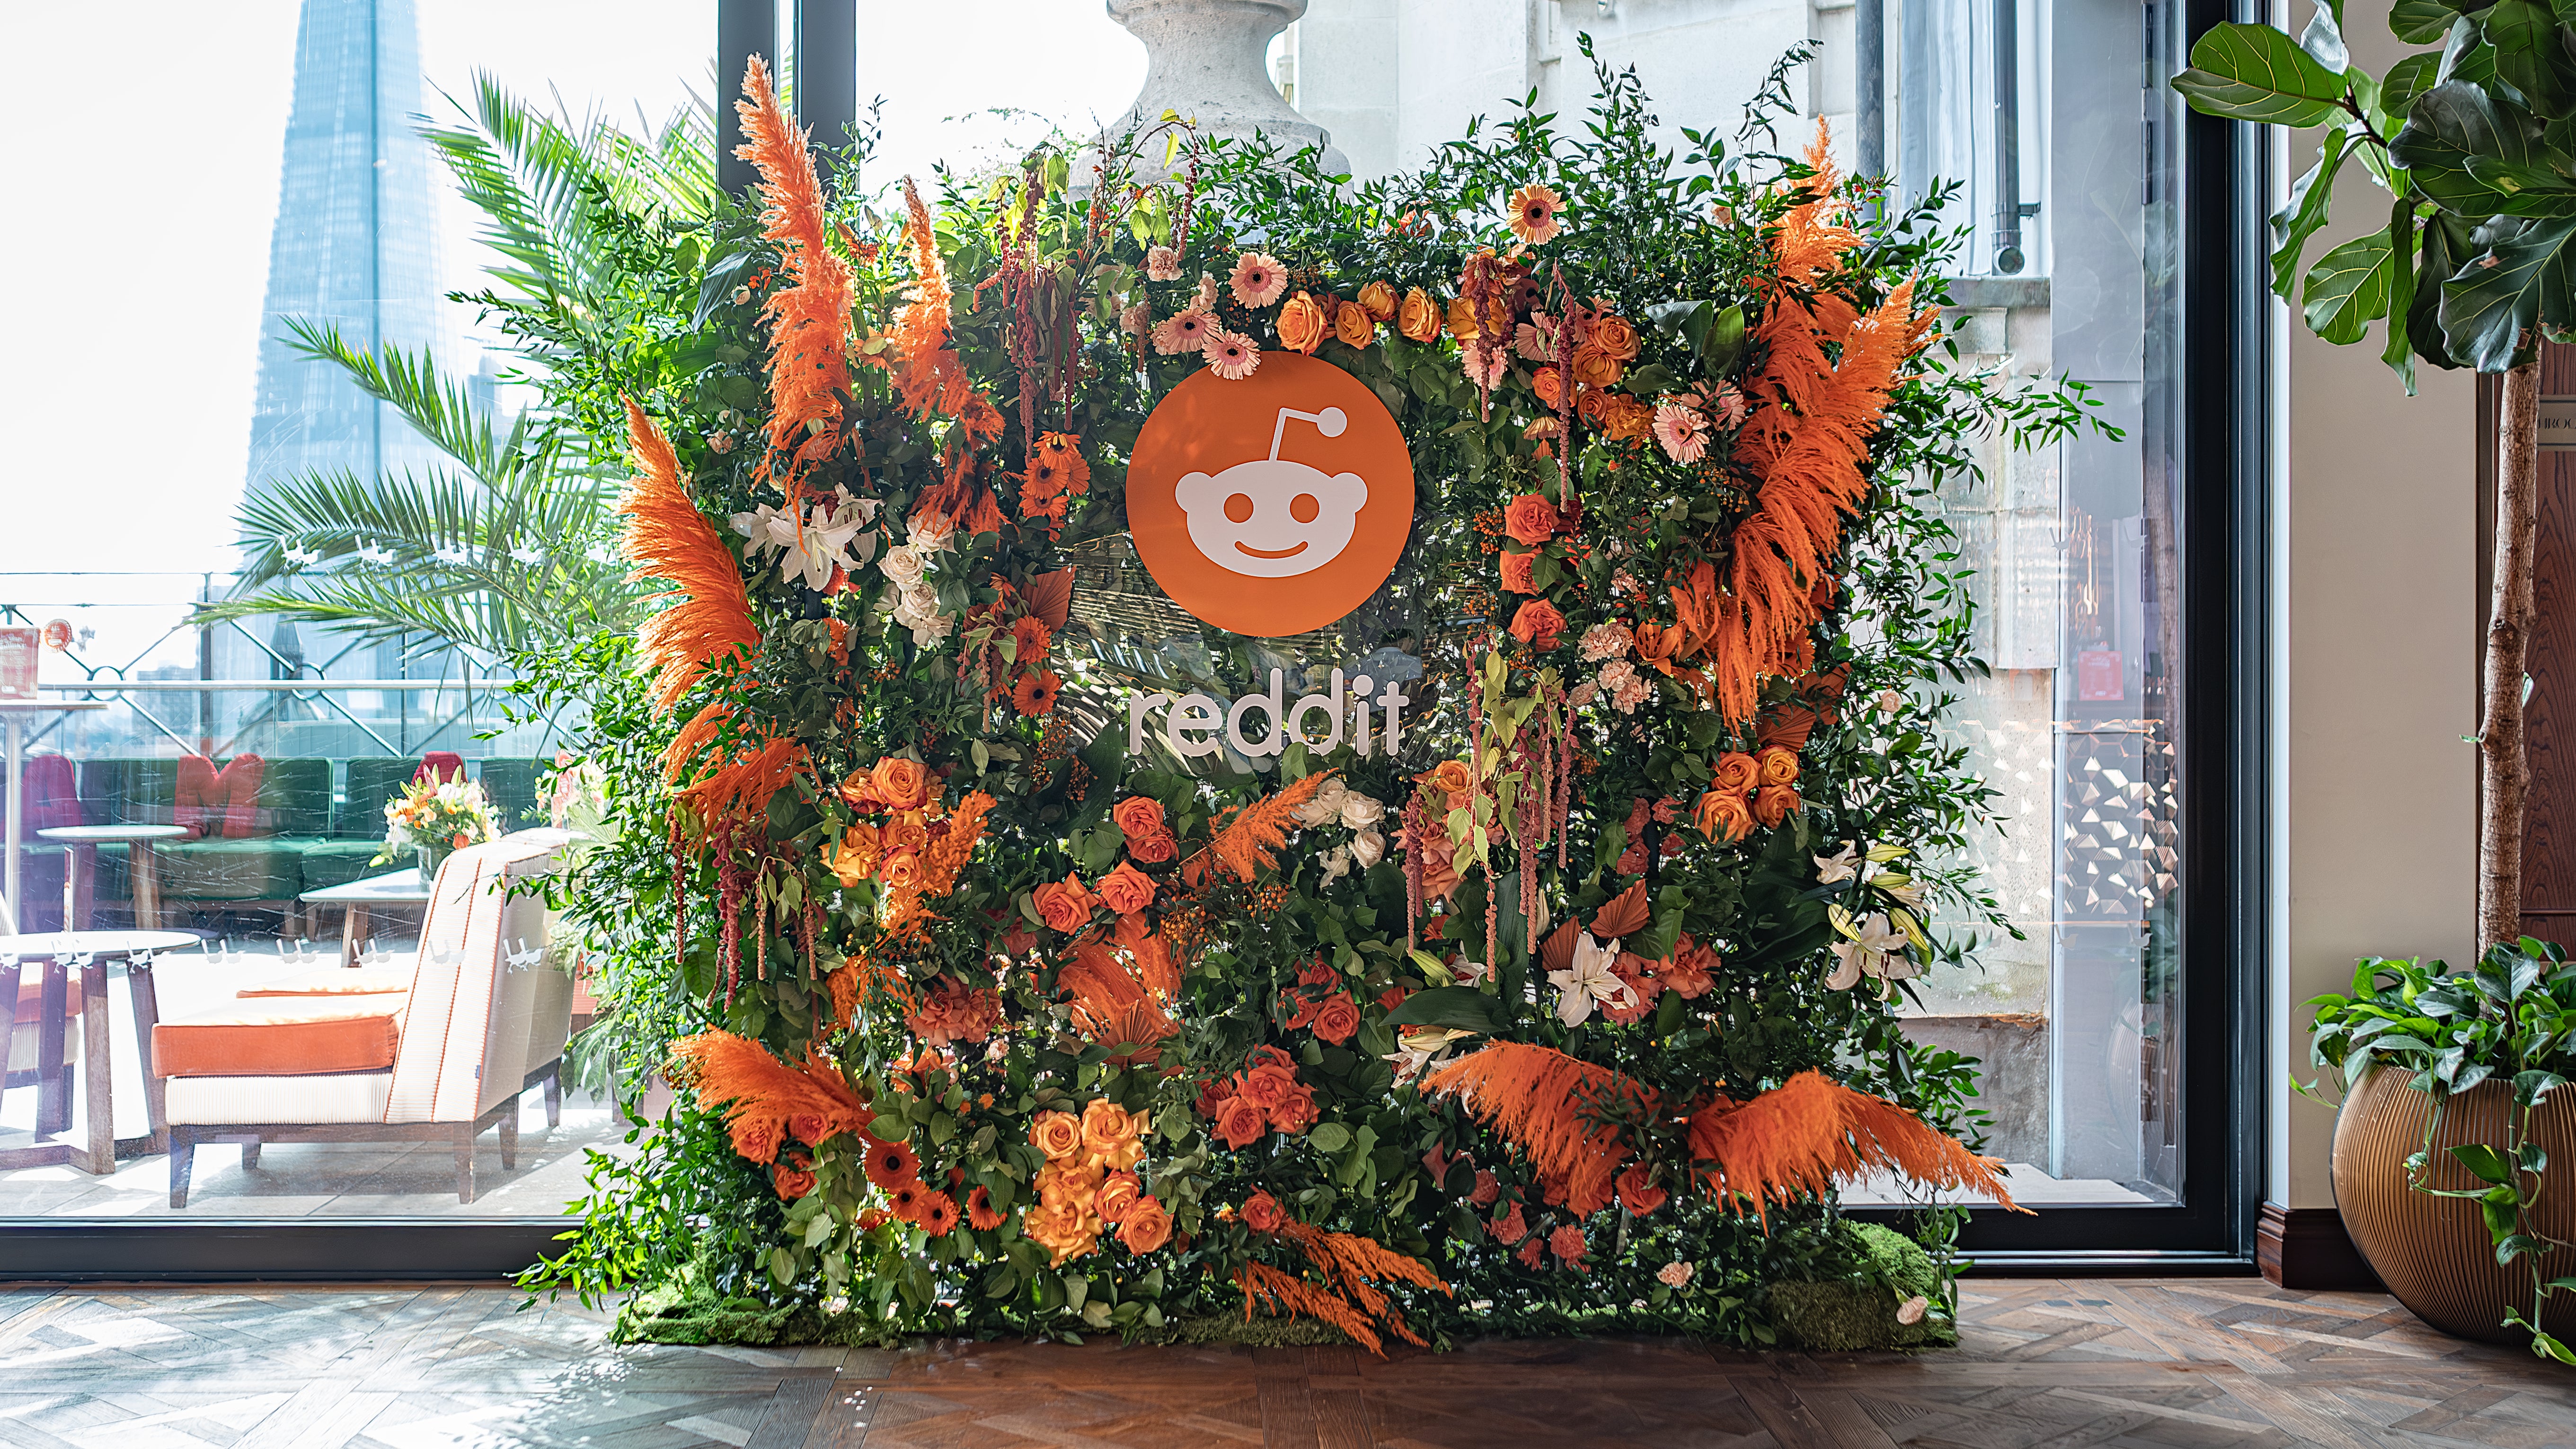 Vibrant orange and green bespoke floral wall installation by Amaranté, designed for Reddit's event, showcasing their brand colours in full bloom.